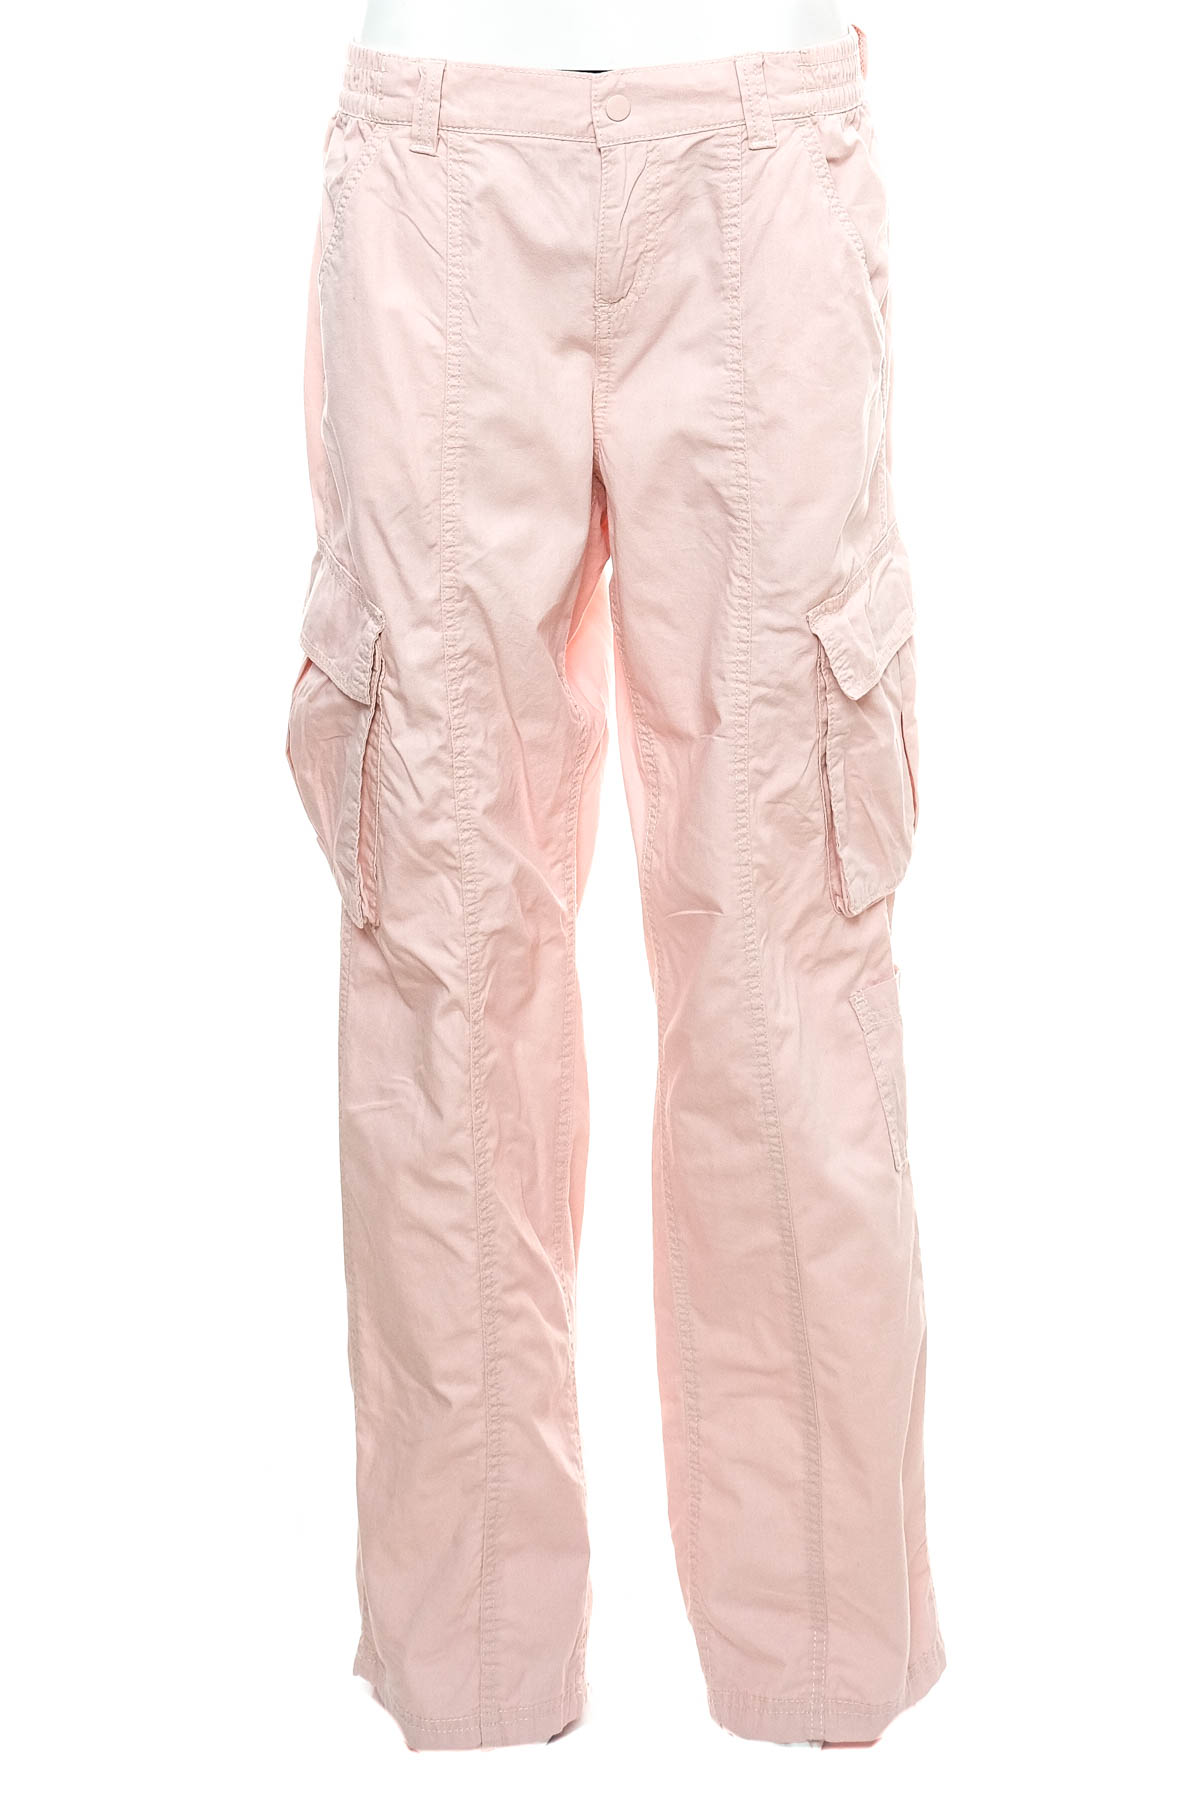 Women's trousers - DIVIDED - 0